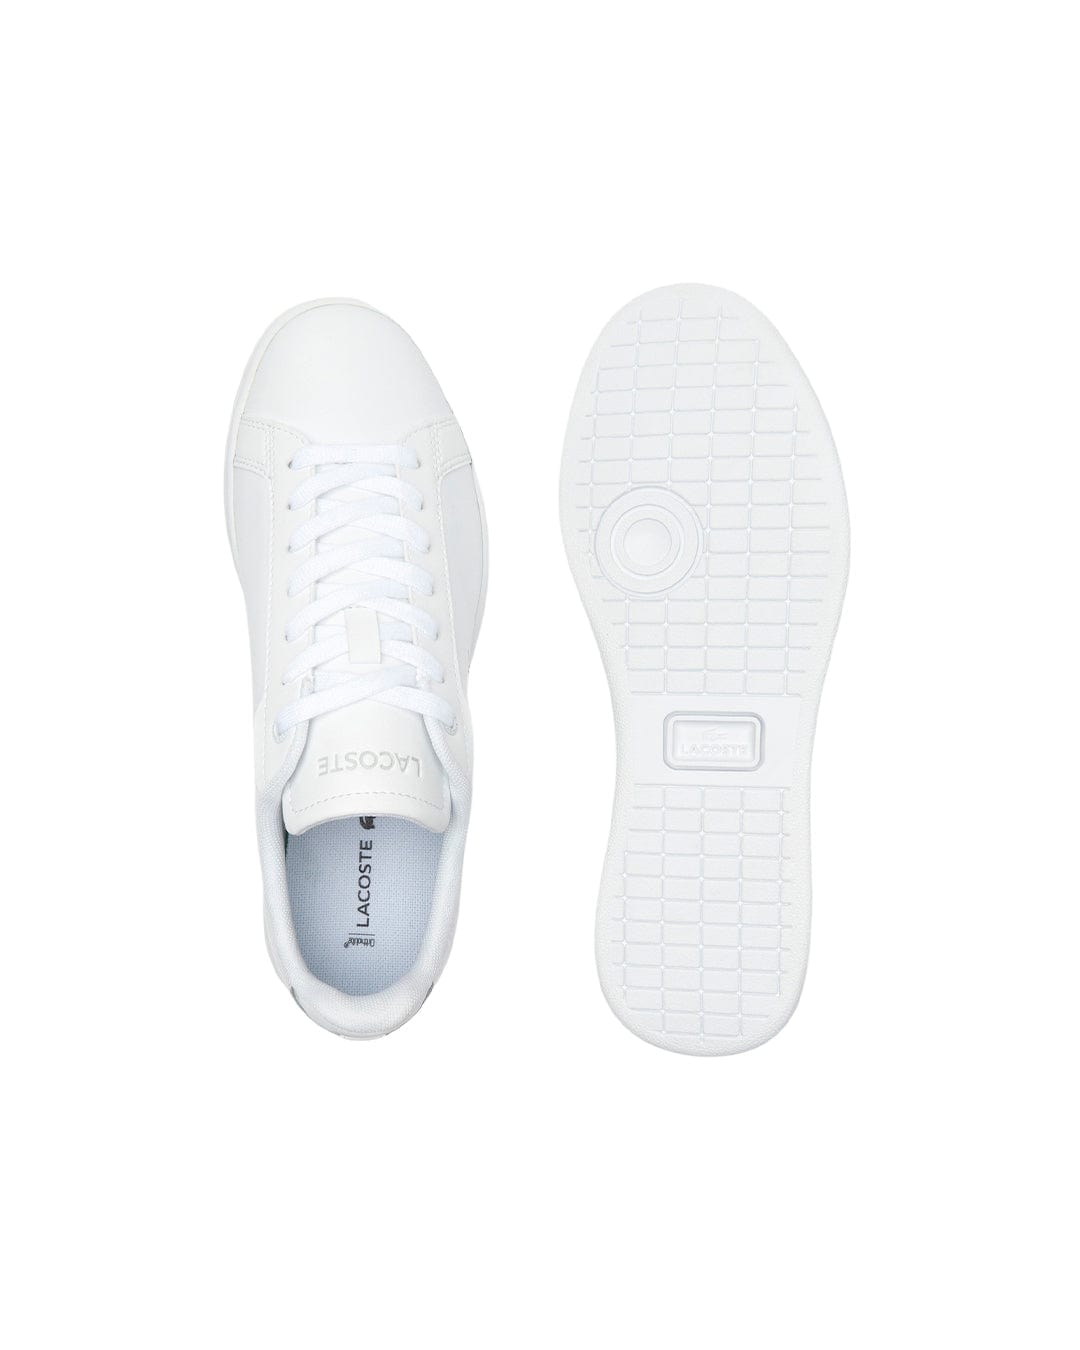 Lacoste Shoes Lacoste Carnaby Pro BL Tonal Leather Sneakers